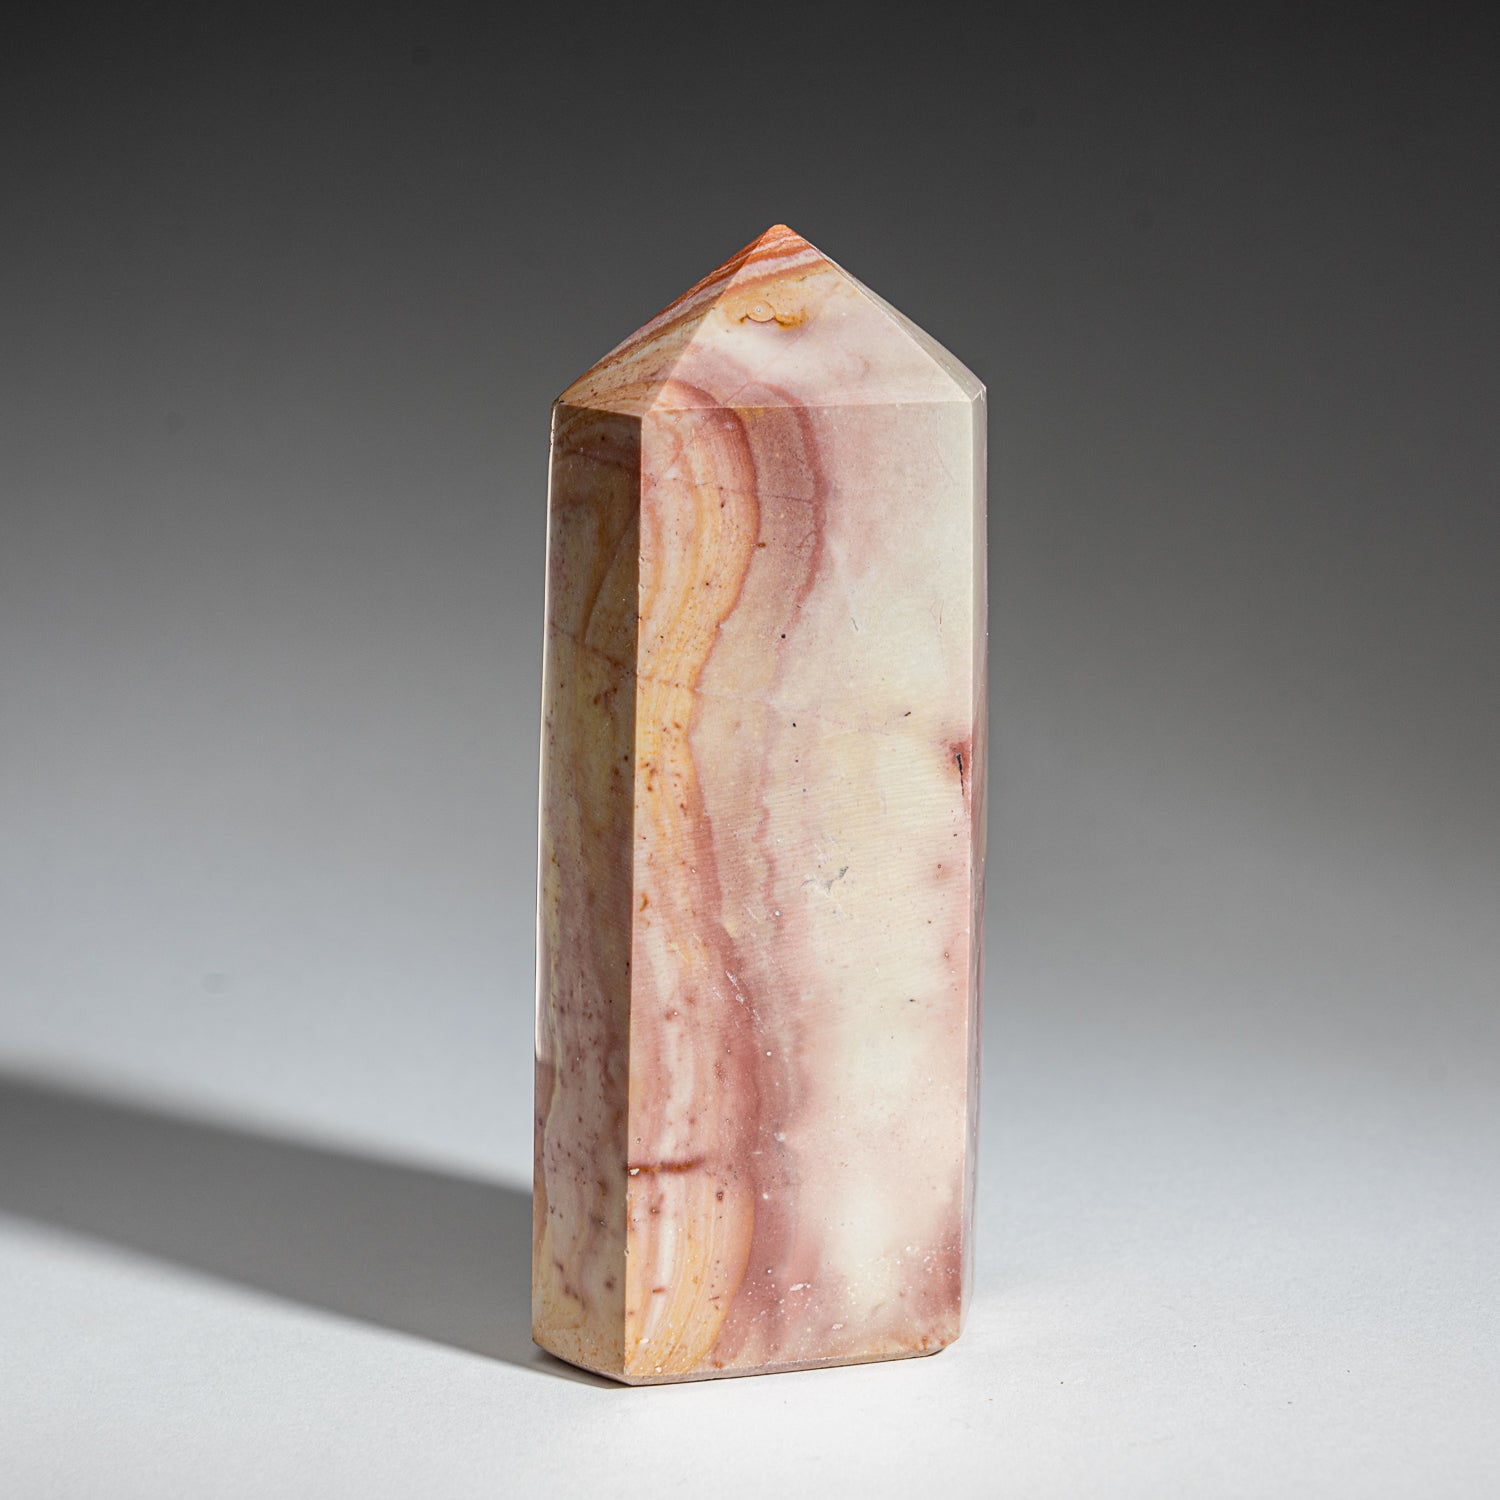 Polished Polychrome Point from Madagascar (1.4 lbs)